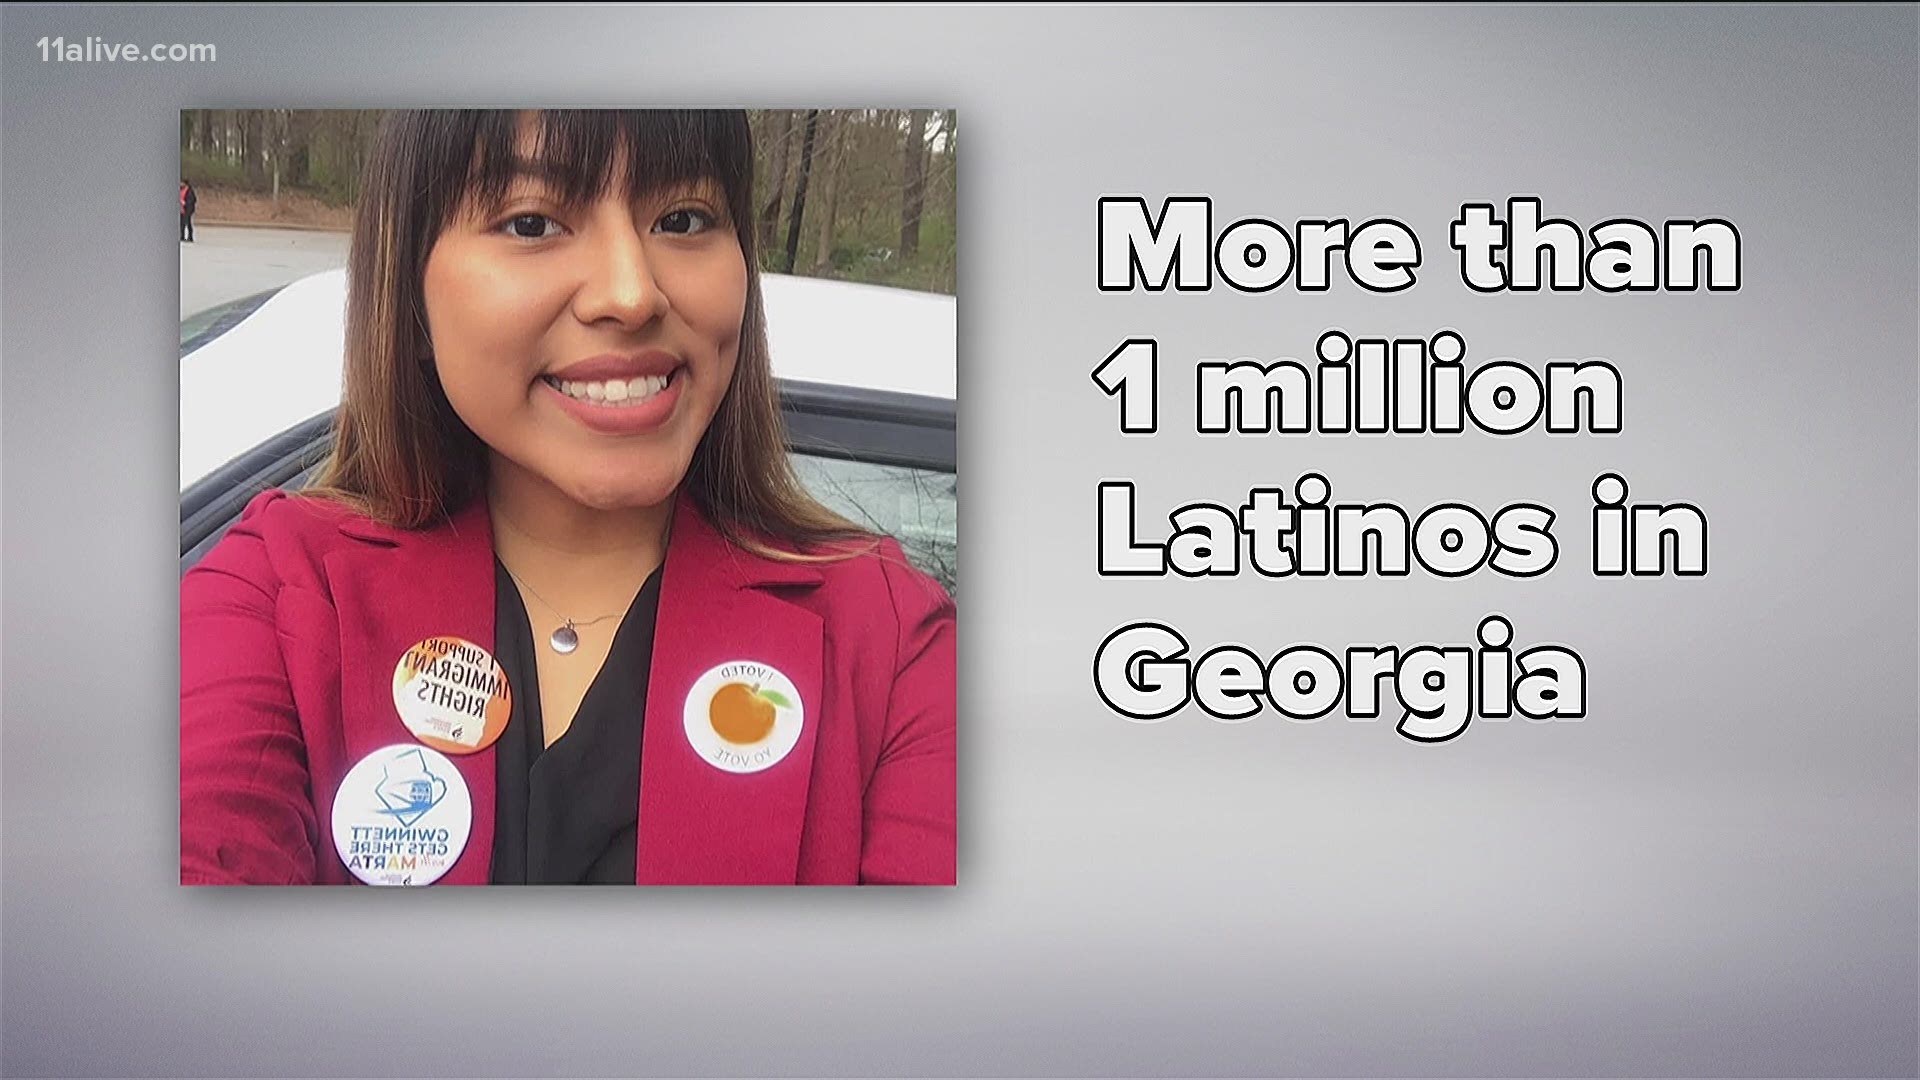 According to the Pew Research Center, Latinos make up 5 percent of Georgia's electorate, with 377,000 of them eligible to vote.